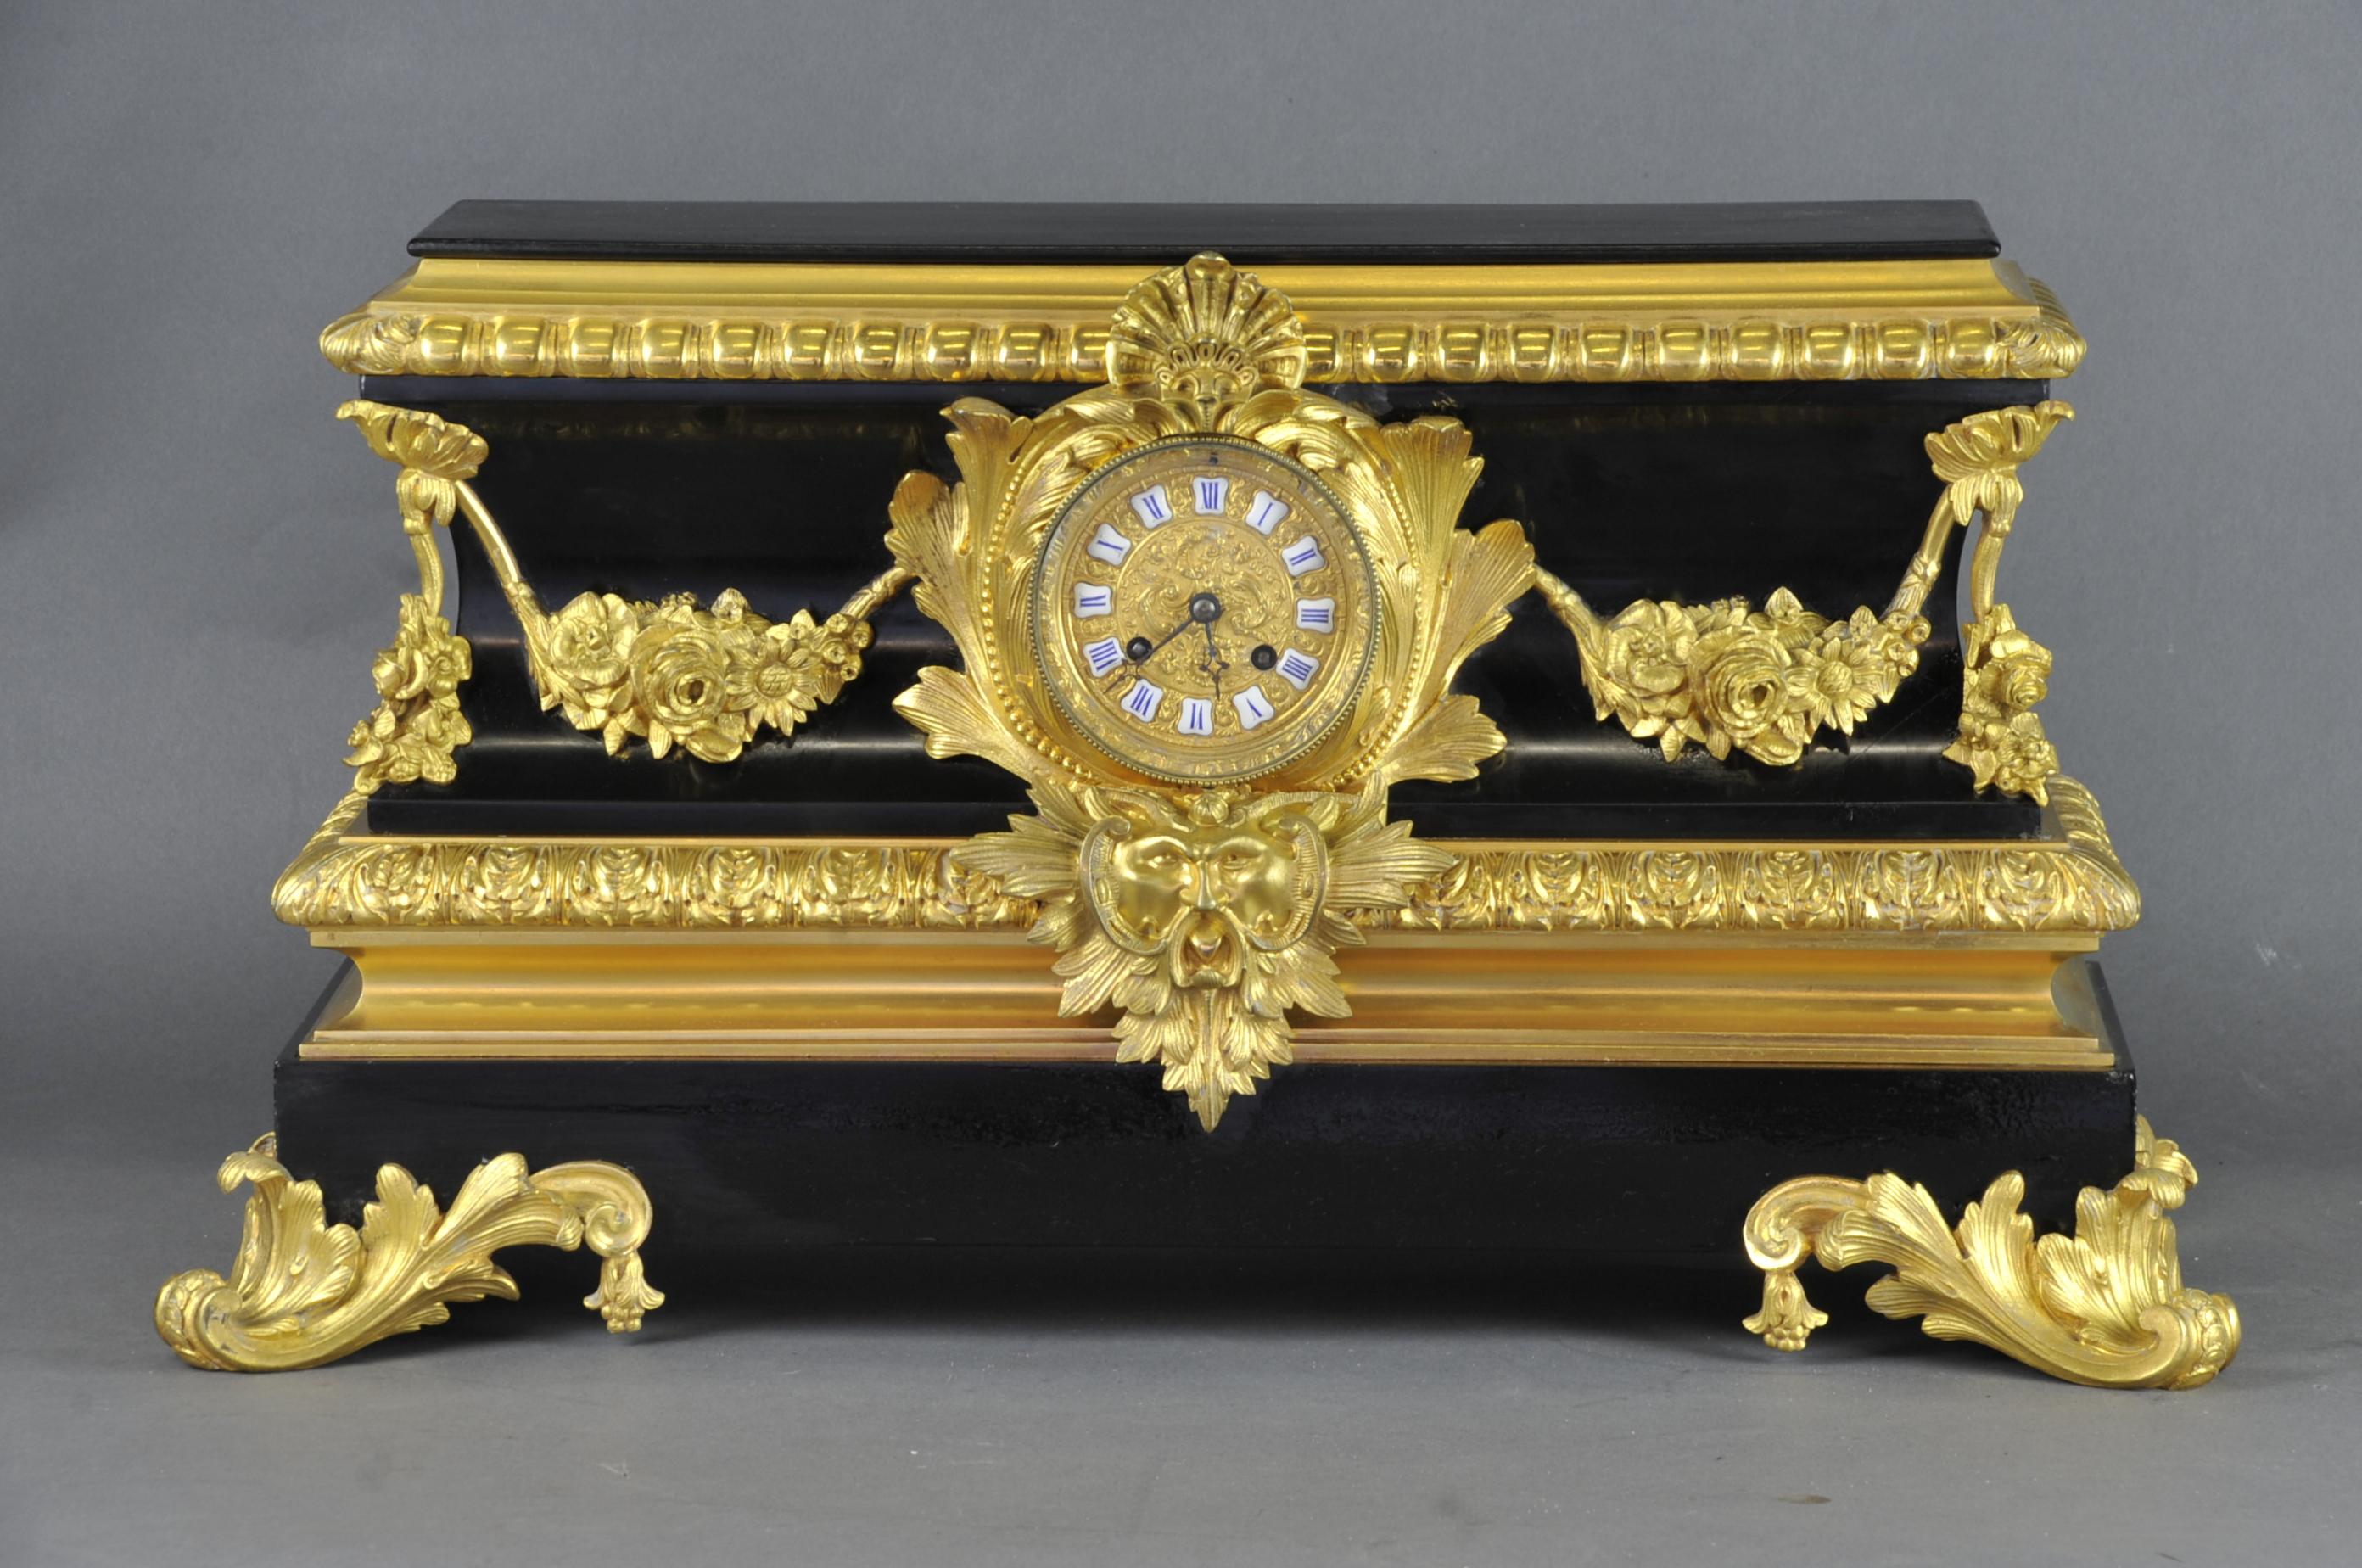 Large and very elegant Napoleon III period mantel clock in black Belgian marble and rich ornamentation in finely chiseled gilt bronze.
Wire movement signed by the house Raingo Frères in Paris. 
Operates but the balance is missing.